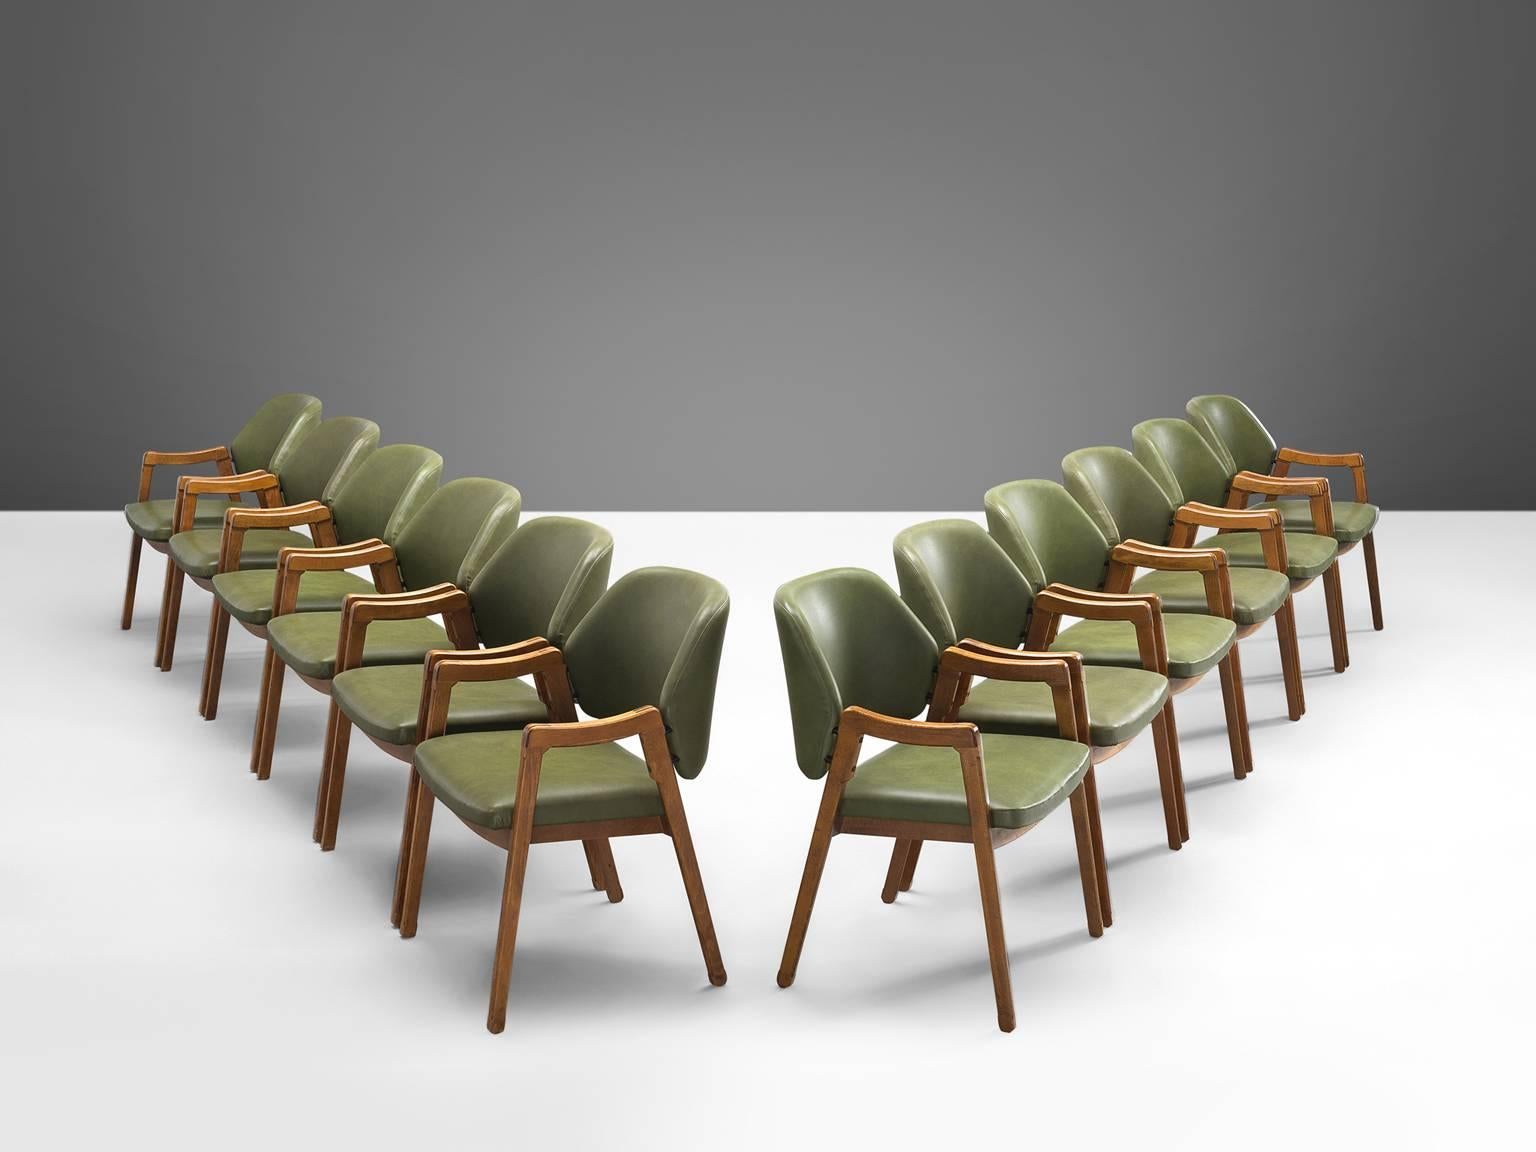 Twelve armchairs by Ico Parisi for Cassina, beech and leatherette, Italy, 1963.

This large set of green conference chairs '814' were are executed to perfection and provide great comfort. These chairs look almost sculpted thanks to the exquisite